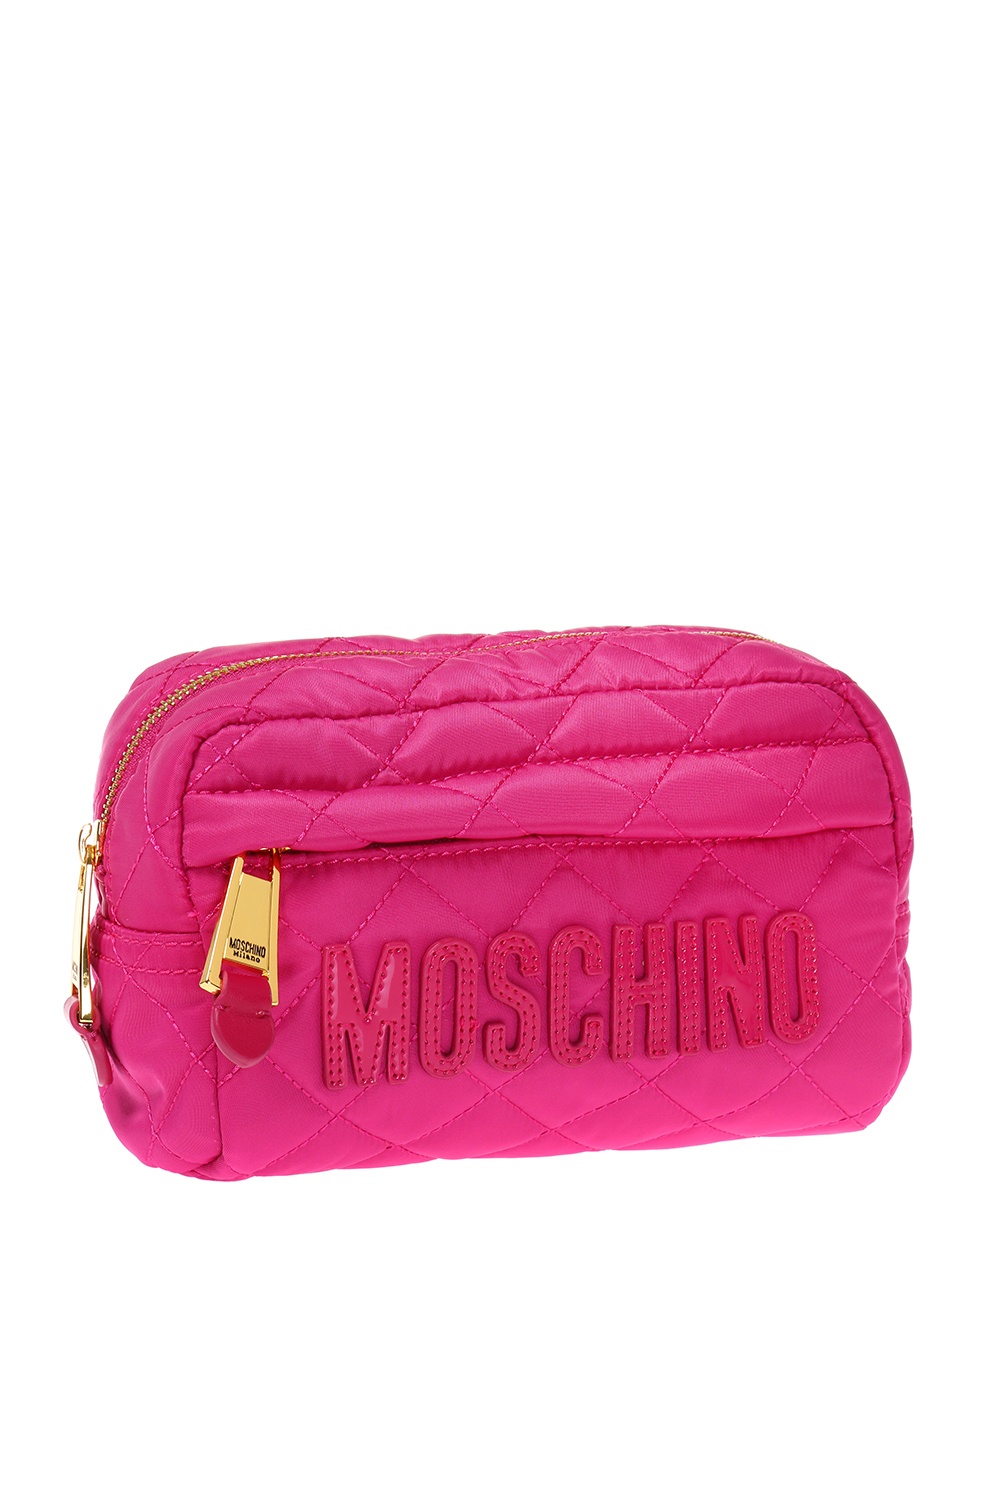 Quilted wash bag Moschino - Vitkac US